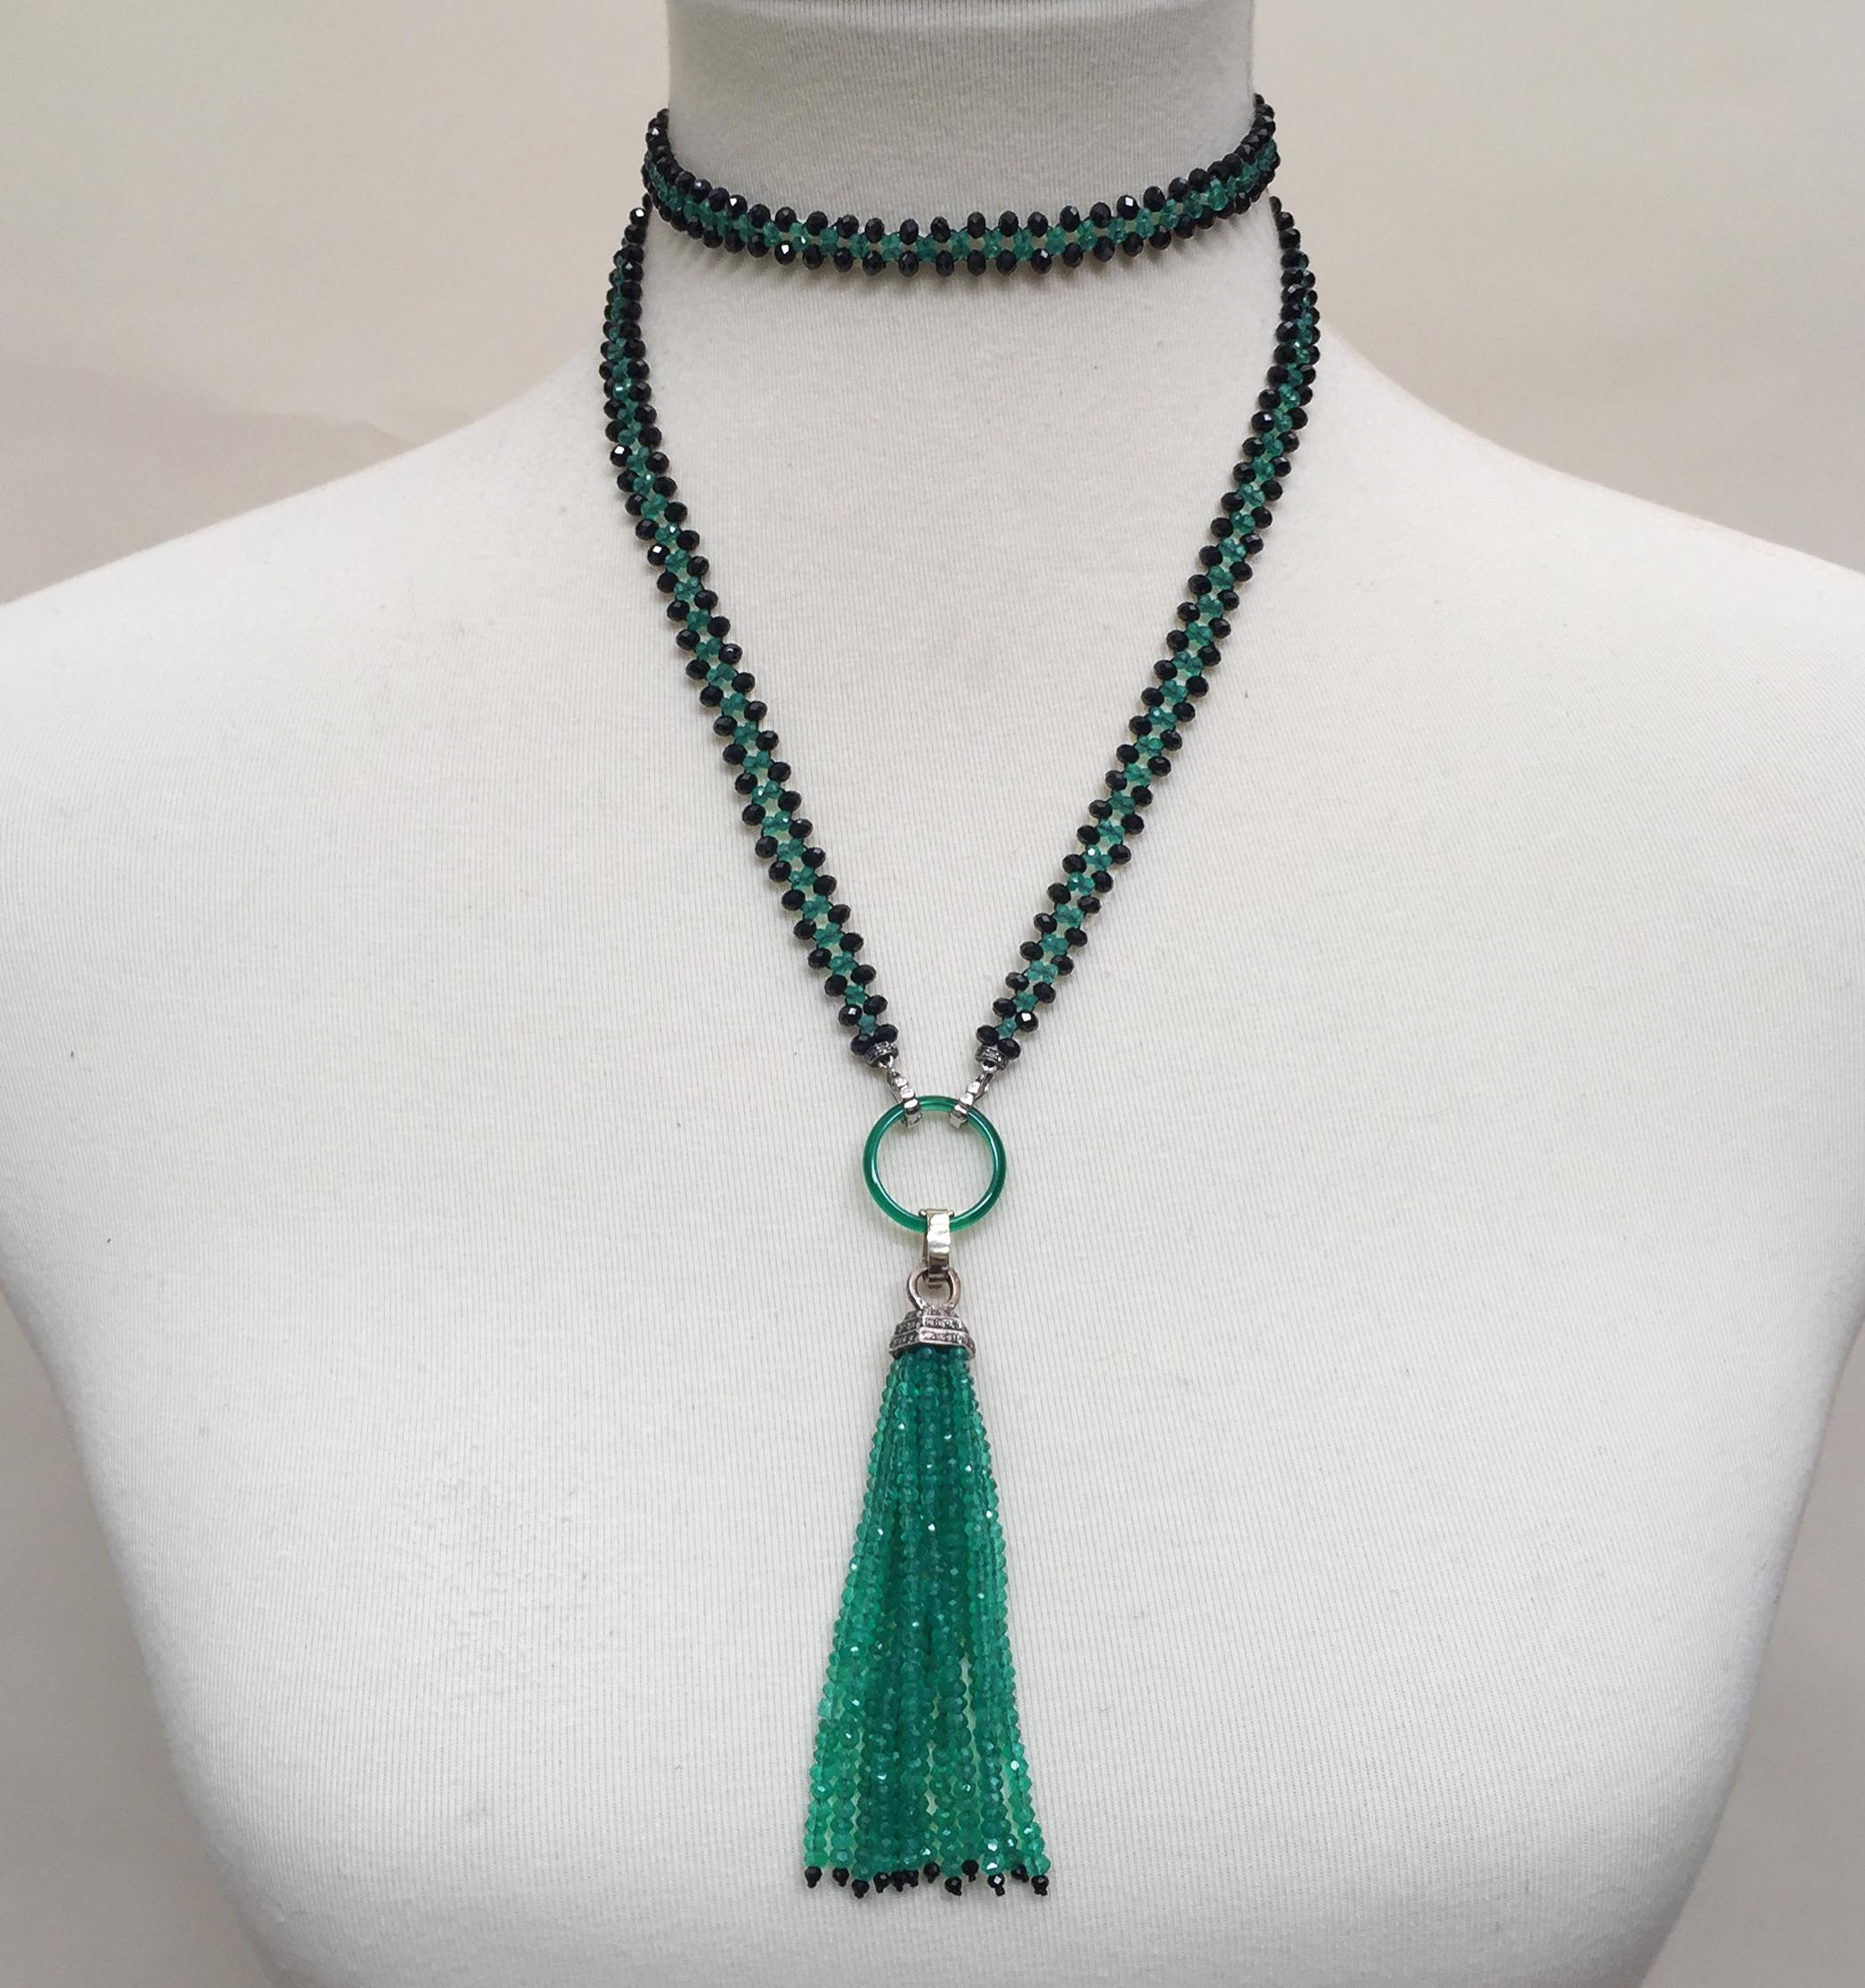 This black spinel and green onyx sautoir  with diamond and green onyx tassel is a striking and beautiful piece. 
At 33.5 inches long it has a variety of wearable options, making it easy to match with any style. The removable tassel 3.5 inches and is